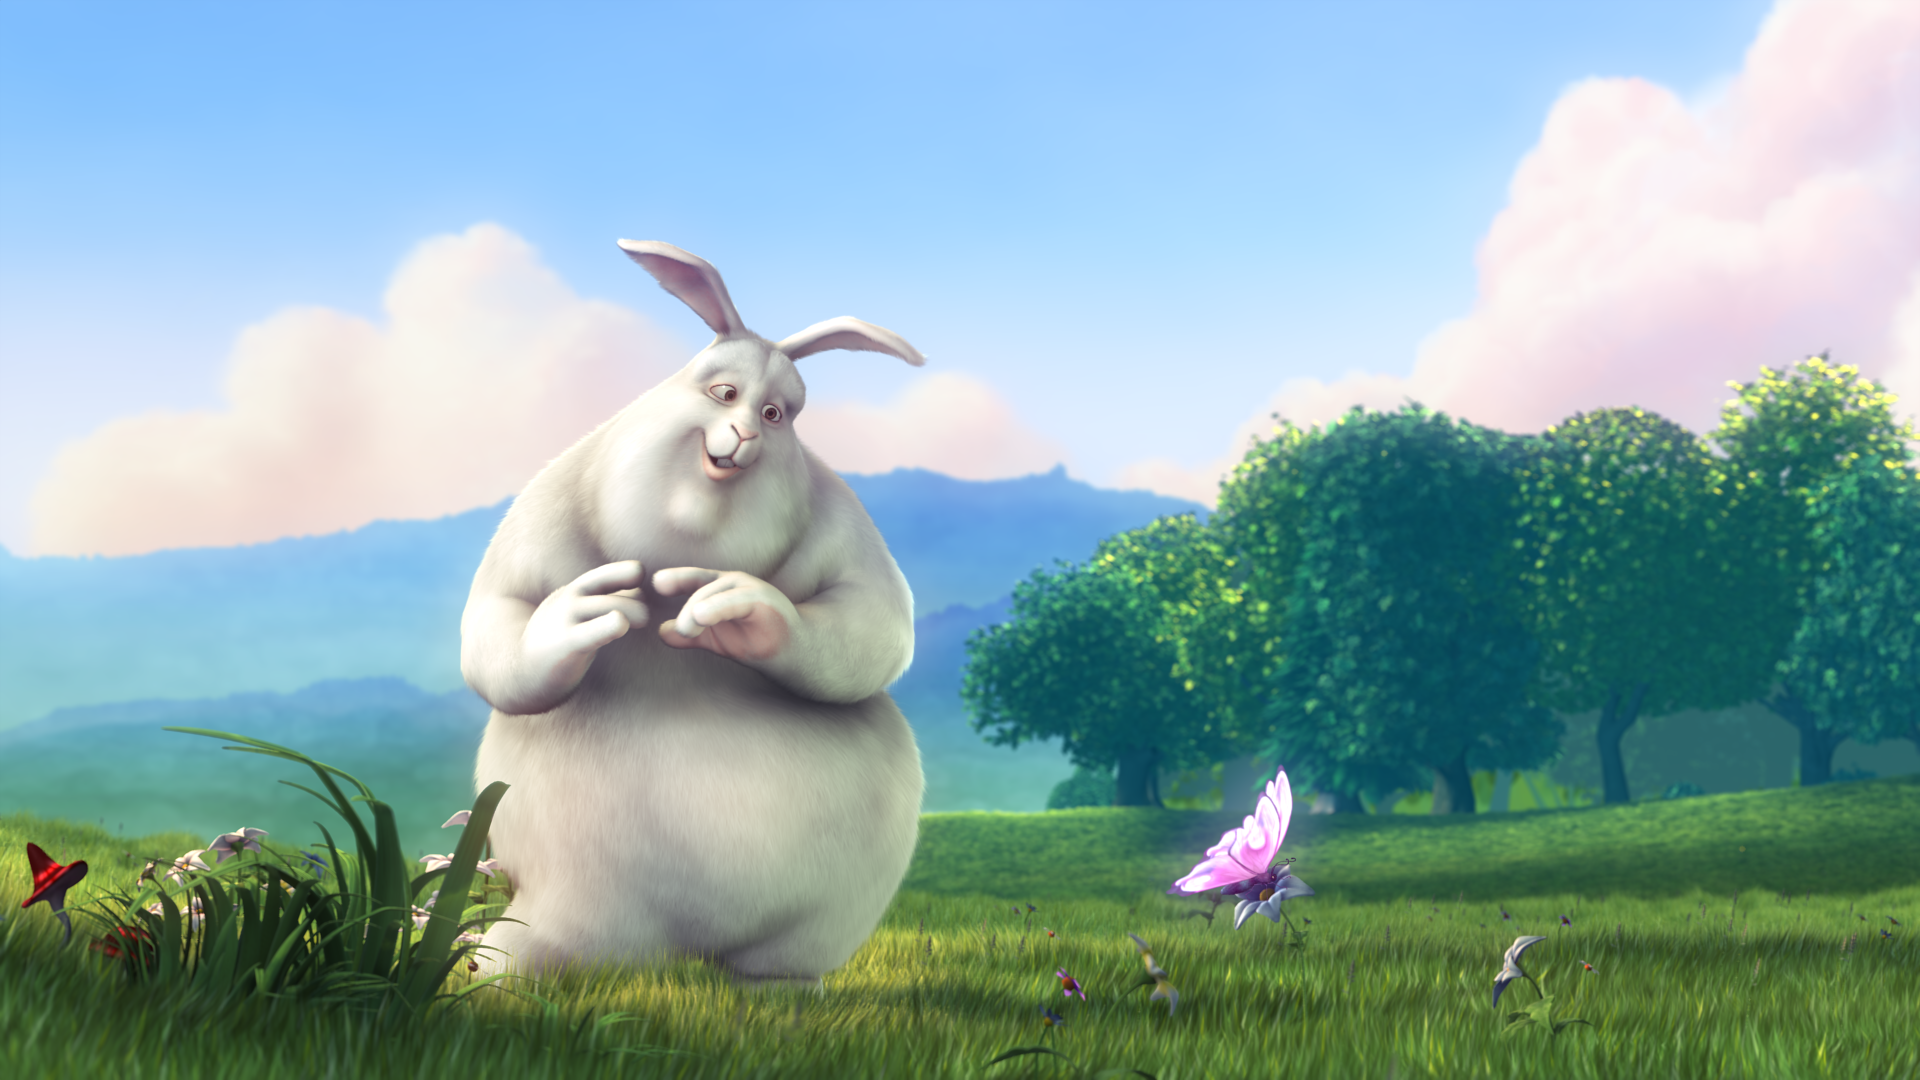 Poster for the Big Buck Bunny film, featuring the bunny character in a green field, along with a purple butterfly